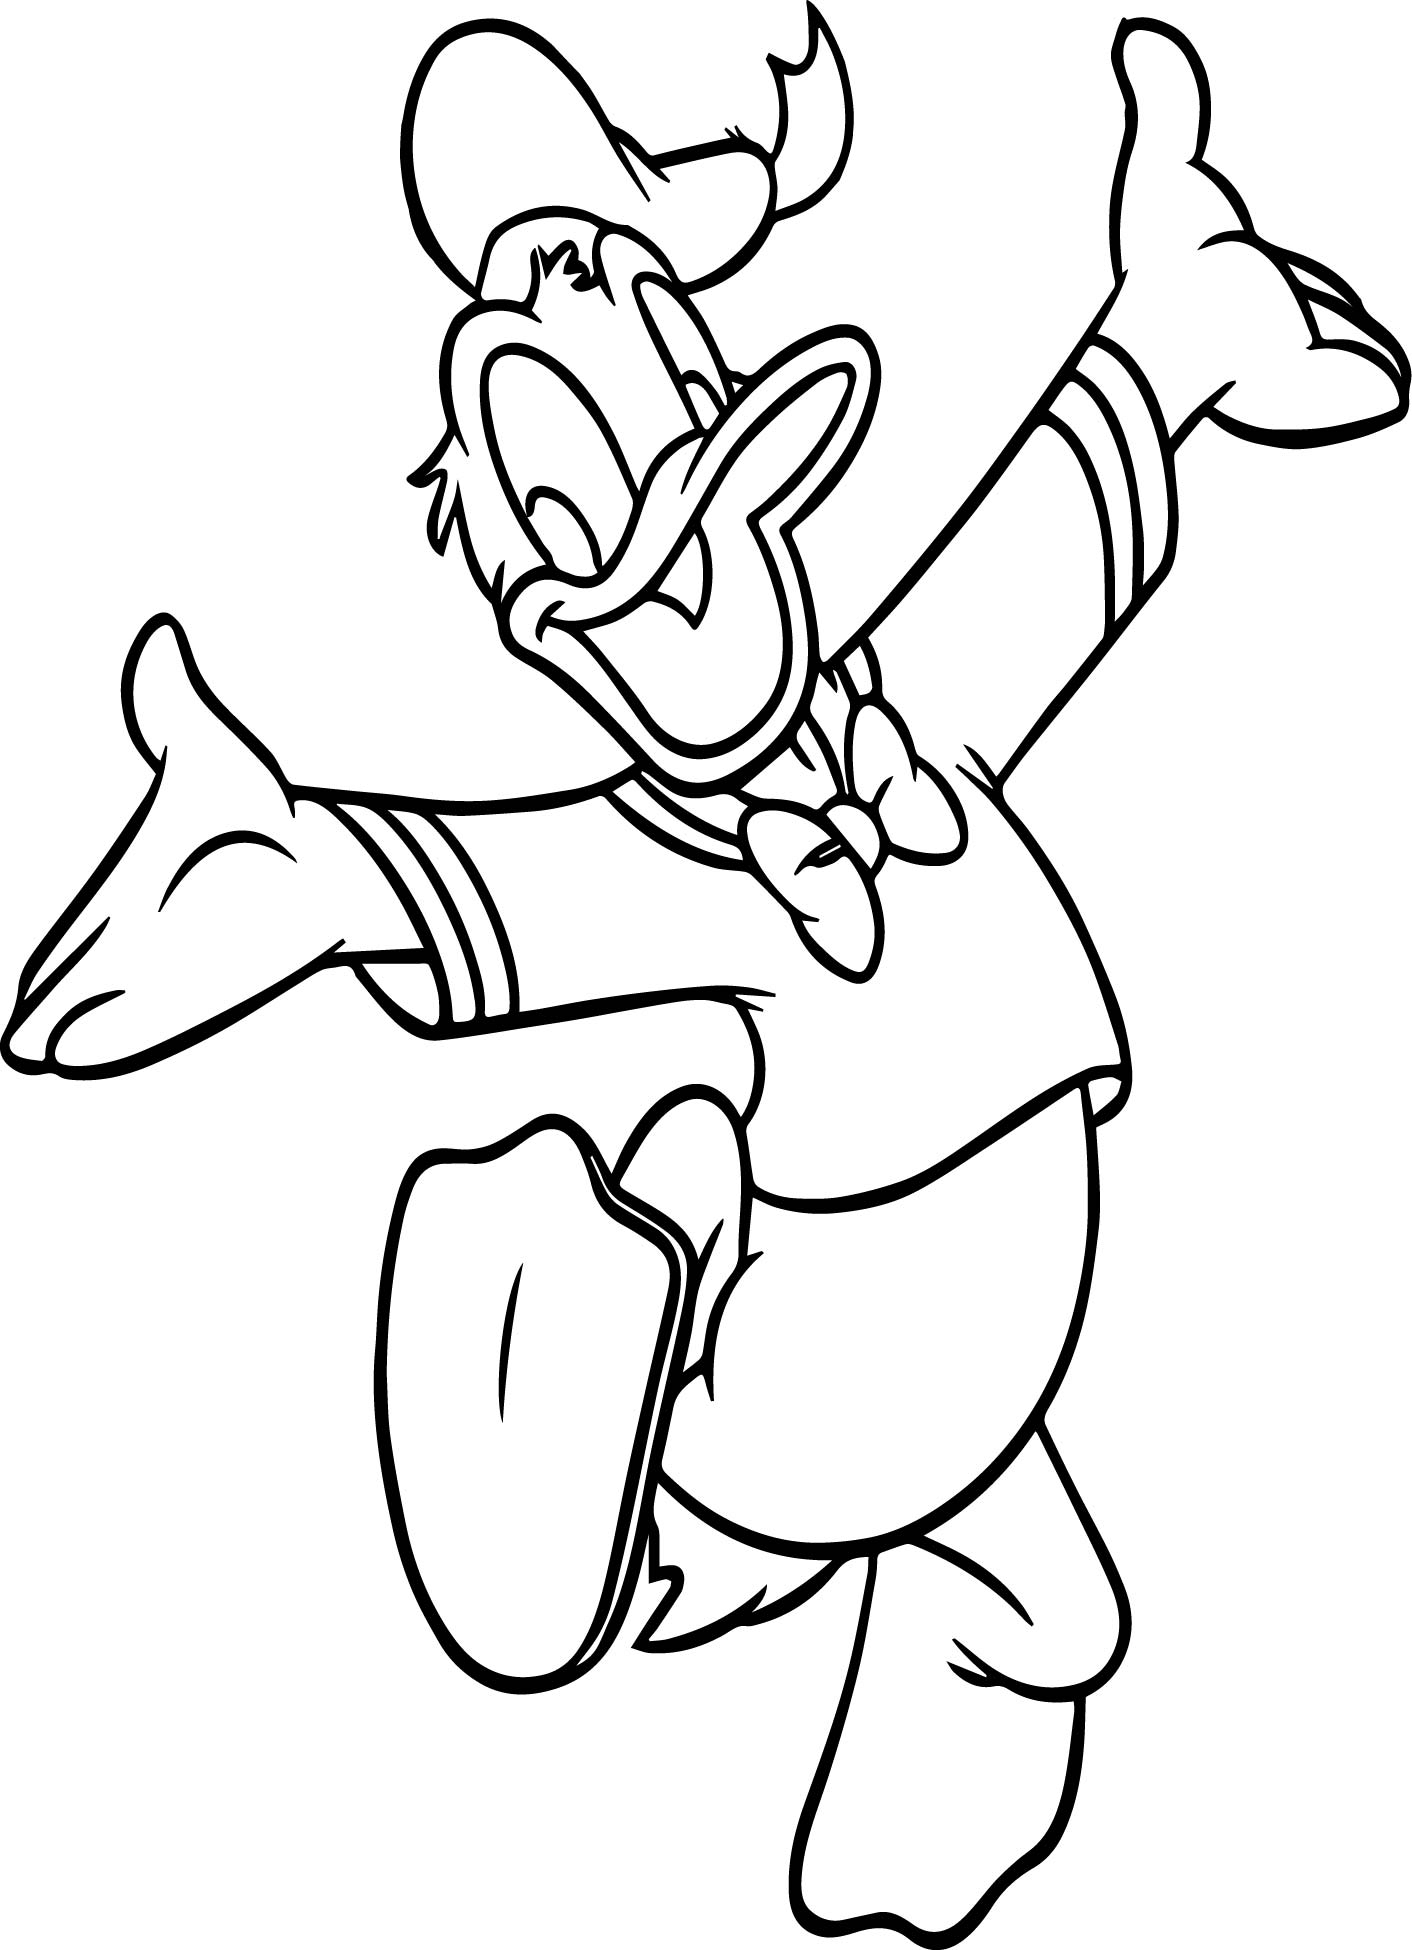 Walt Disney Characters Coloring Pages at GetColorings com Free